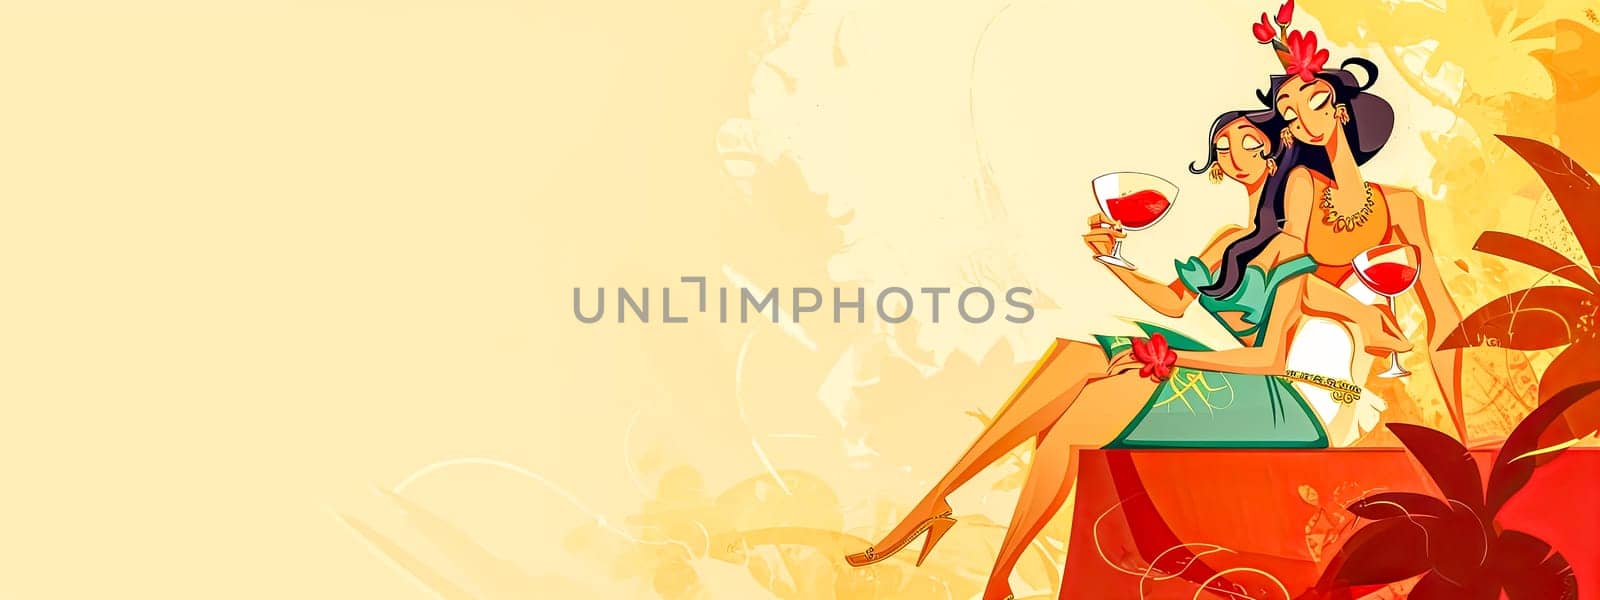 two women in elegant attire sitting back-to-back, each holding a wine glass, with a floral motif and abstract elements in a yellow and orange color scheme, event banner with space for text by Edophoto